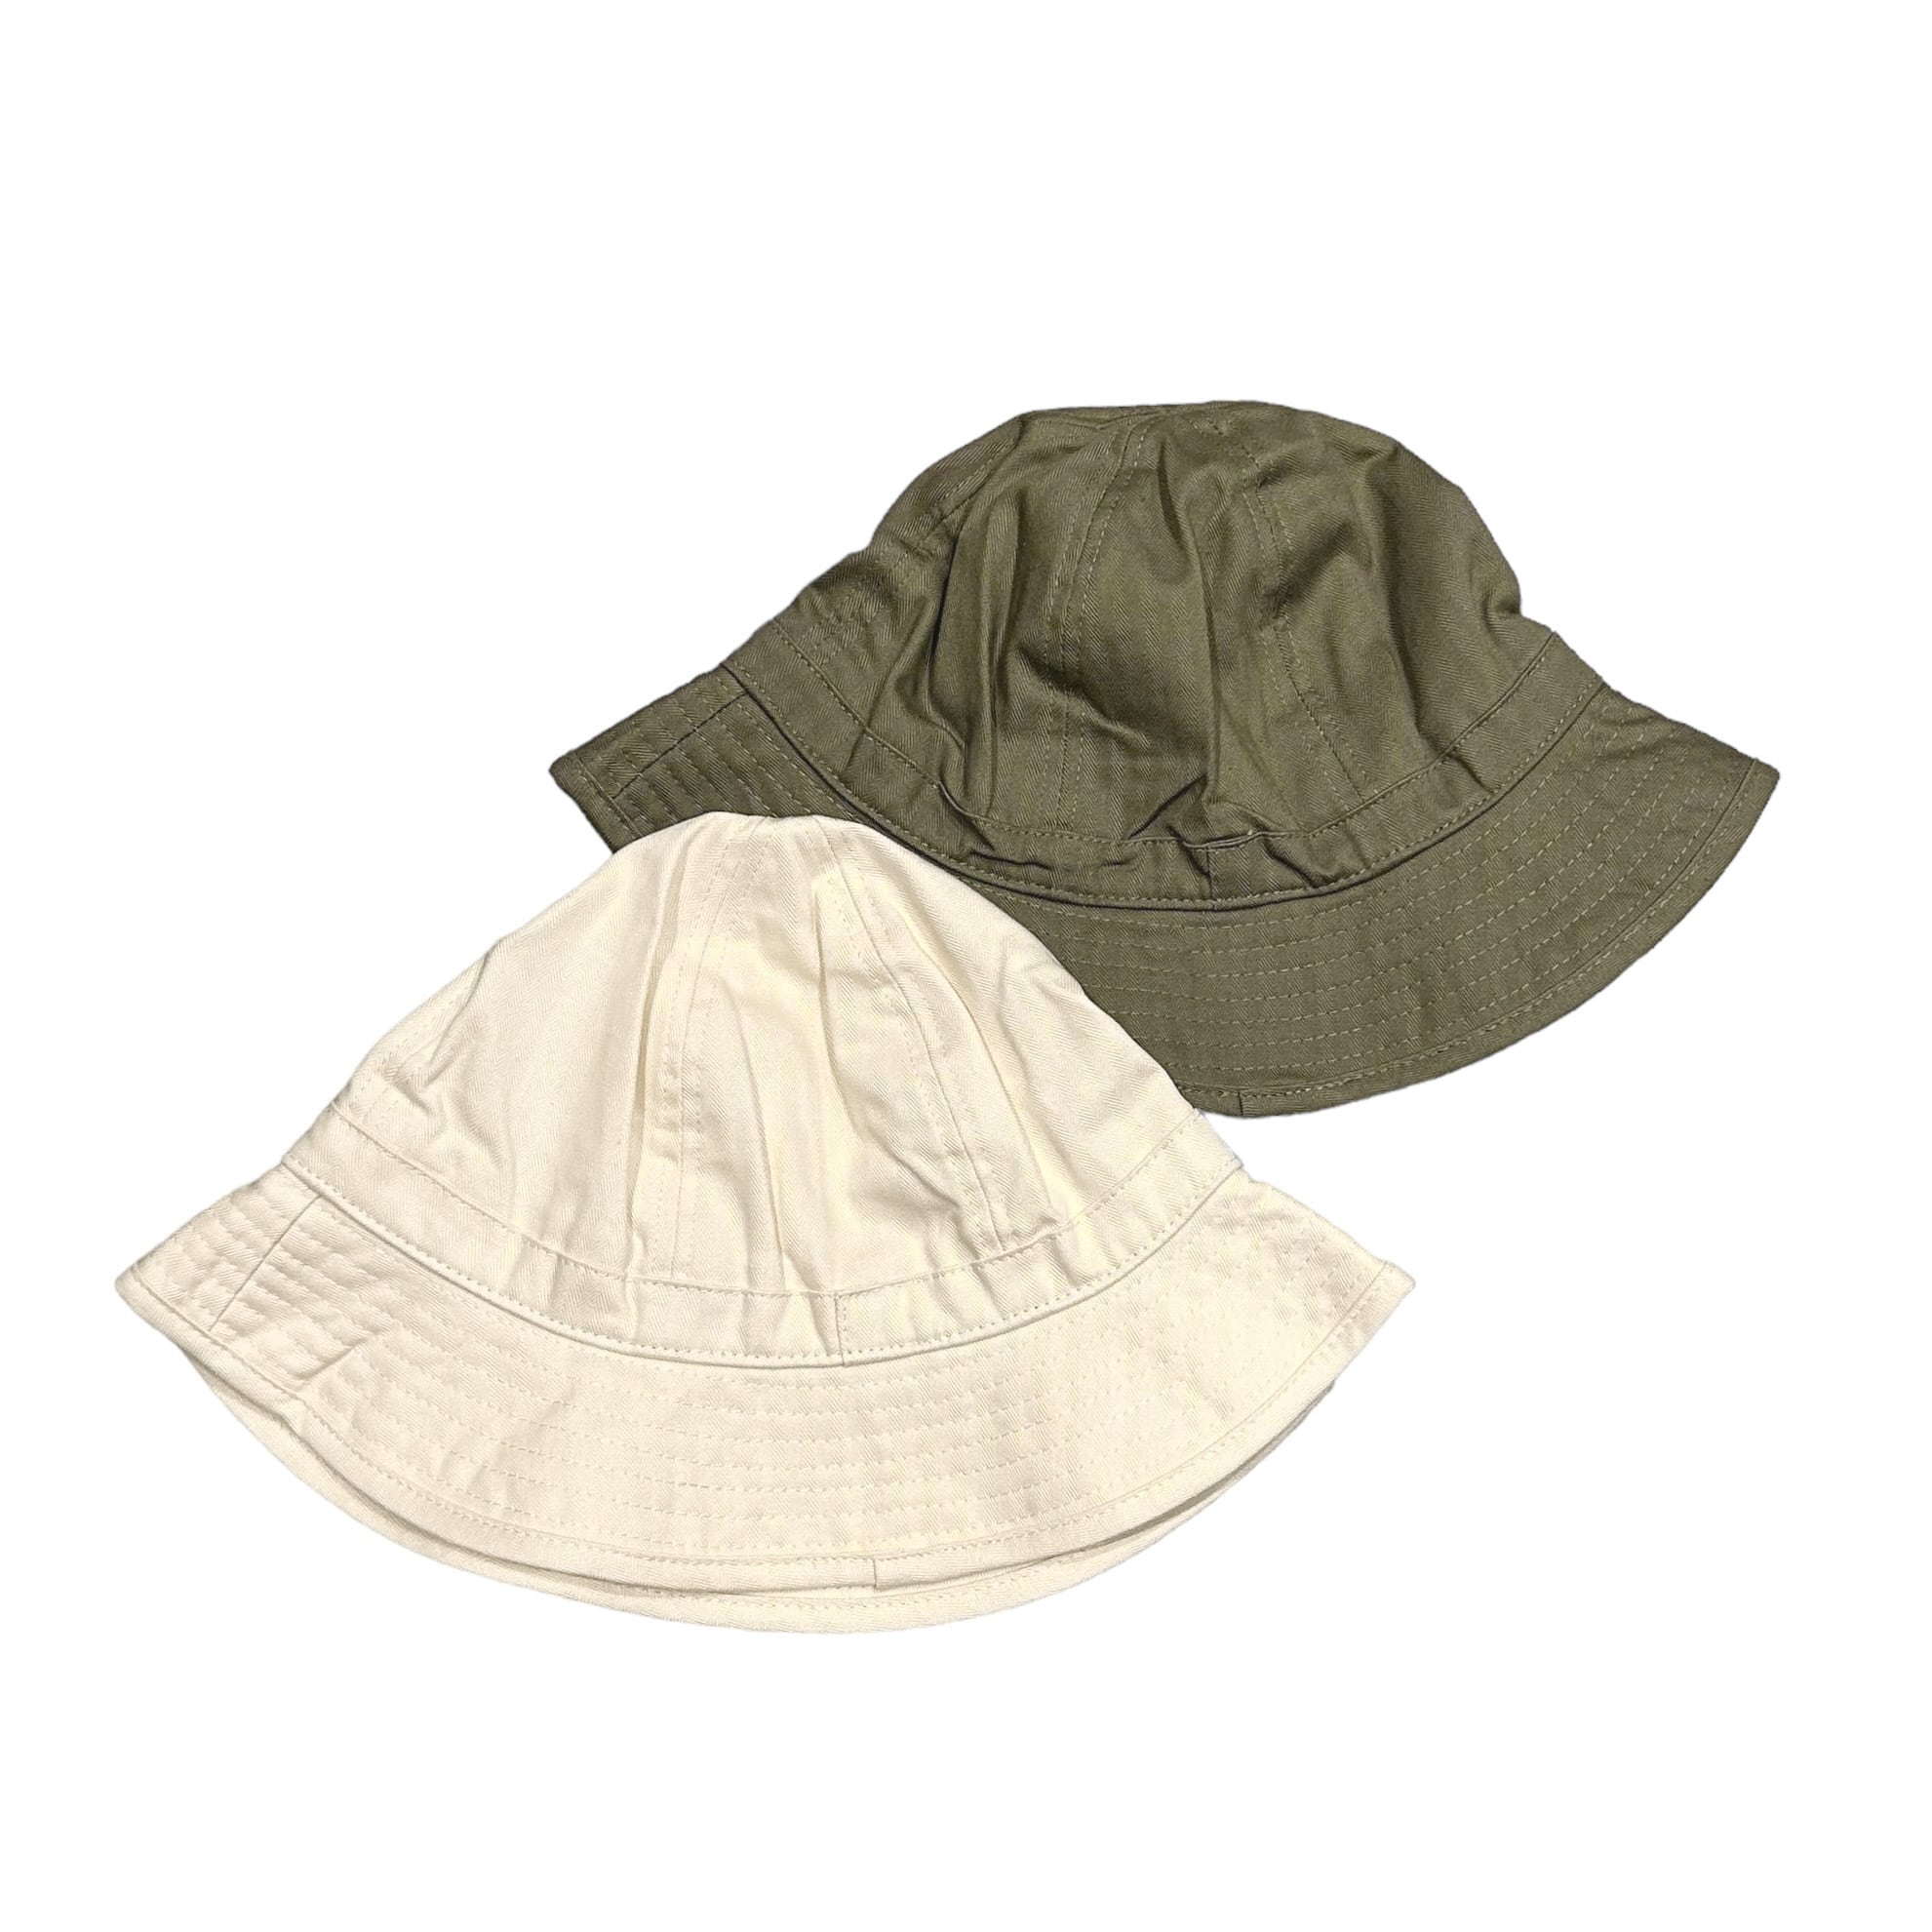 REPRODUCT US Army Type M-41 HBT Hat / レプリカ リプロダクト アメリカ軍 ヘリンボーンツイル ハット ミリタリー